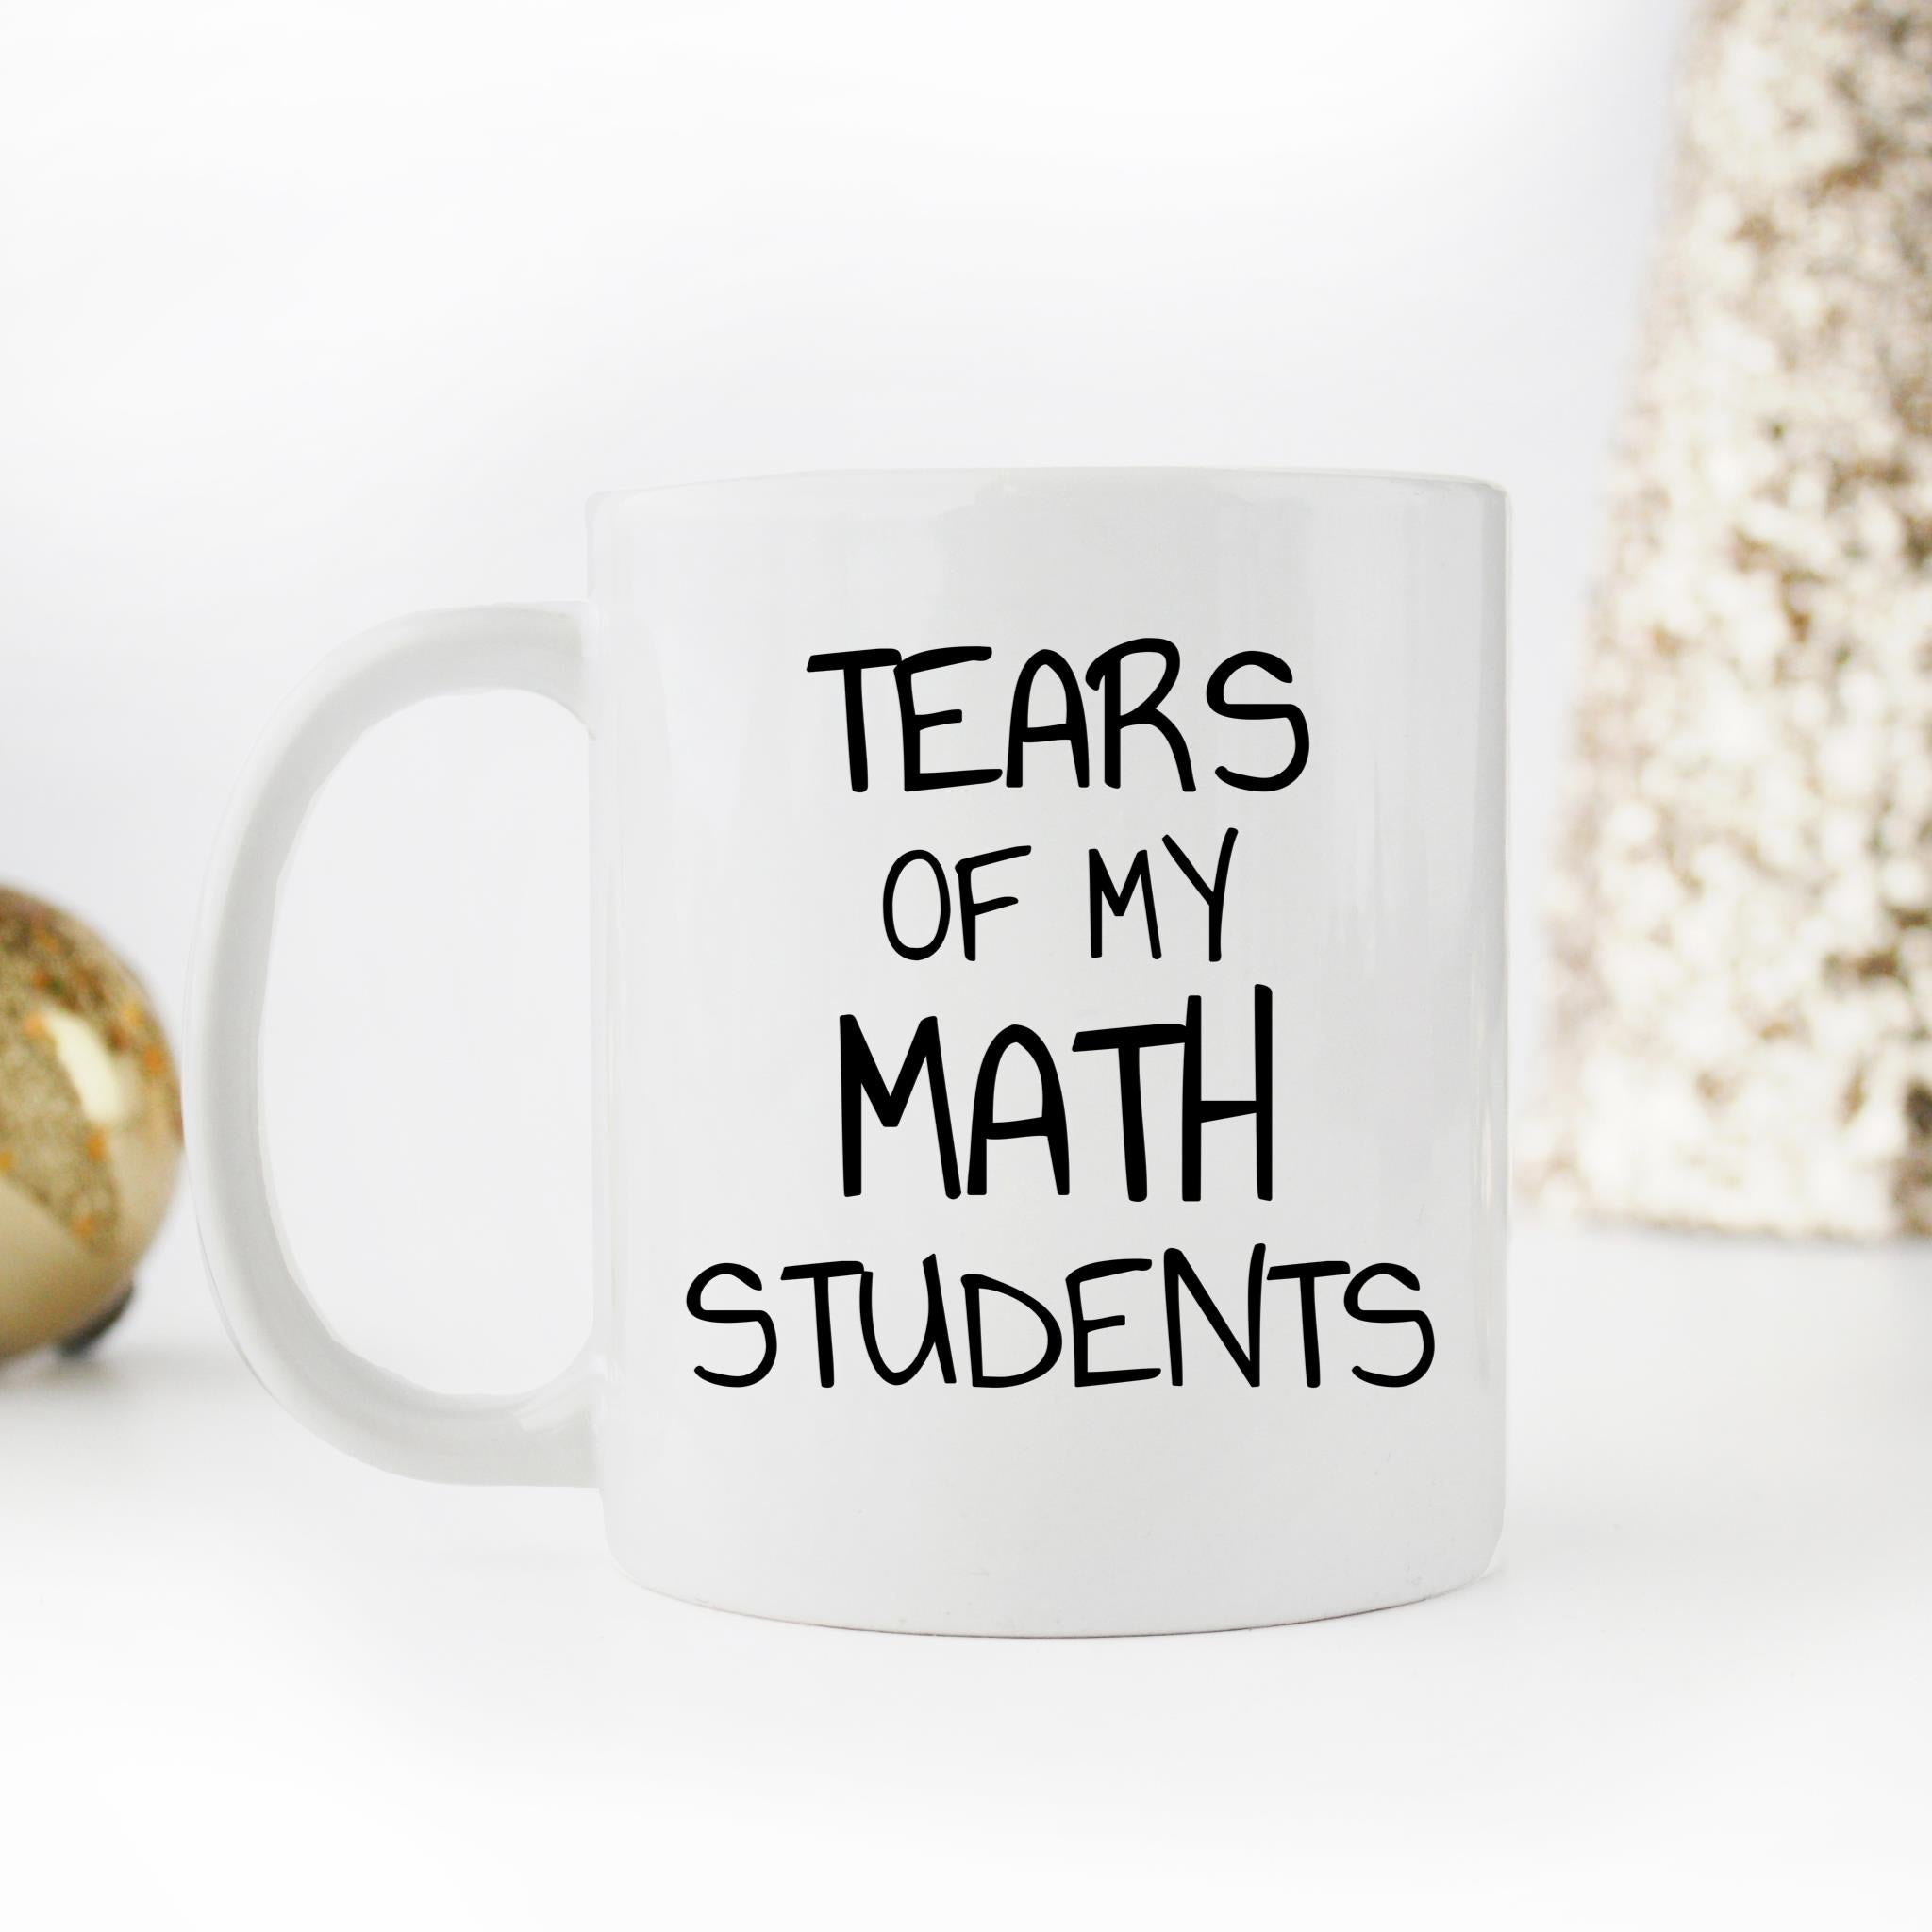 Tears of My Students Travel Mug for Men or Women, Funny